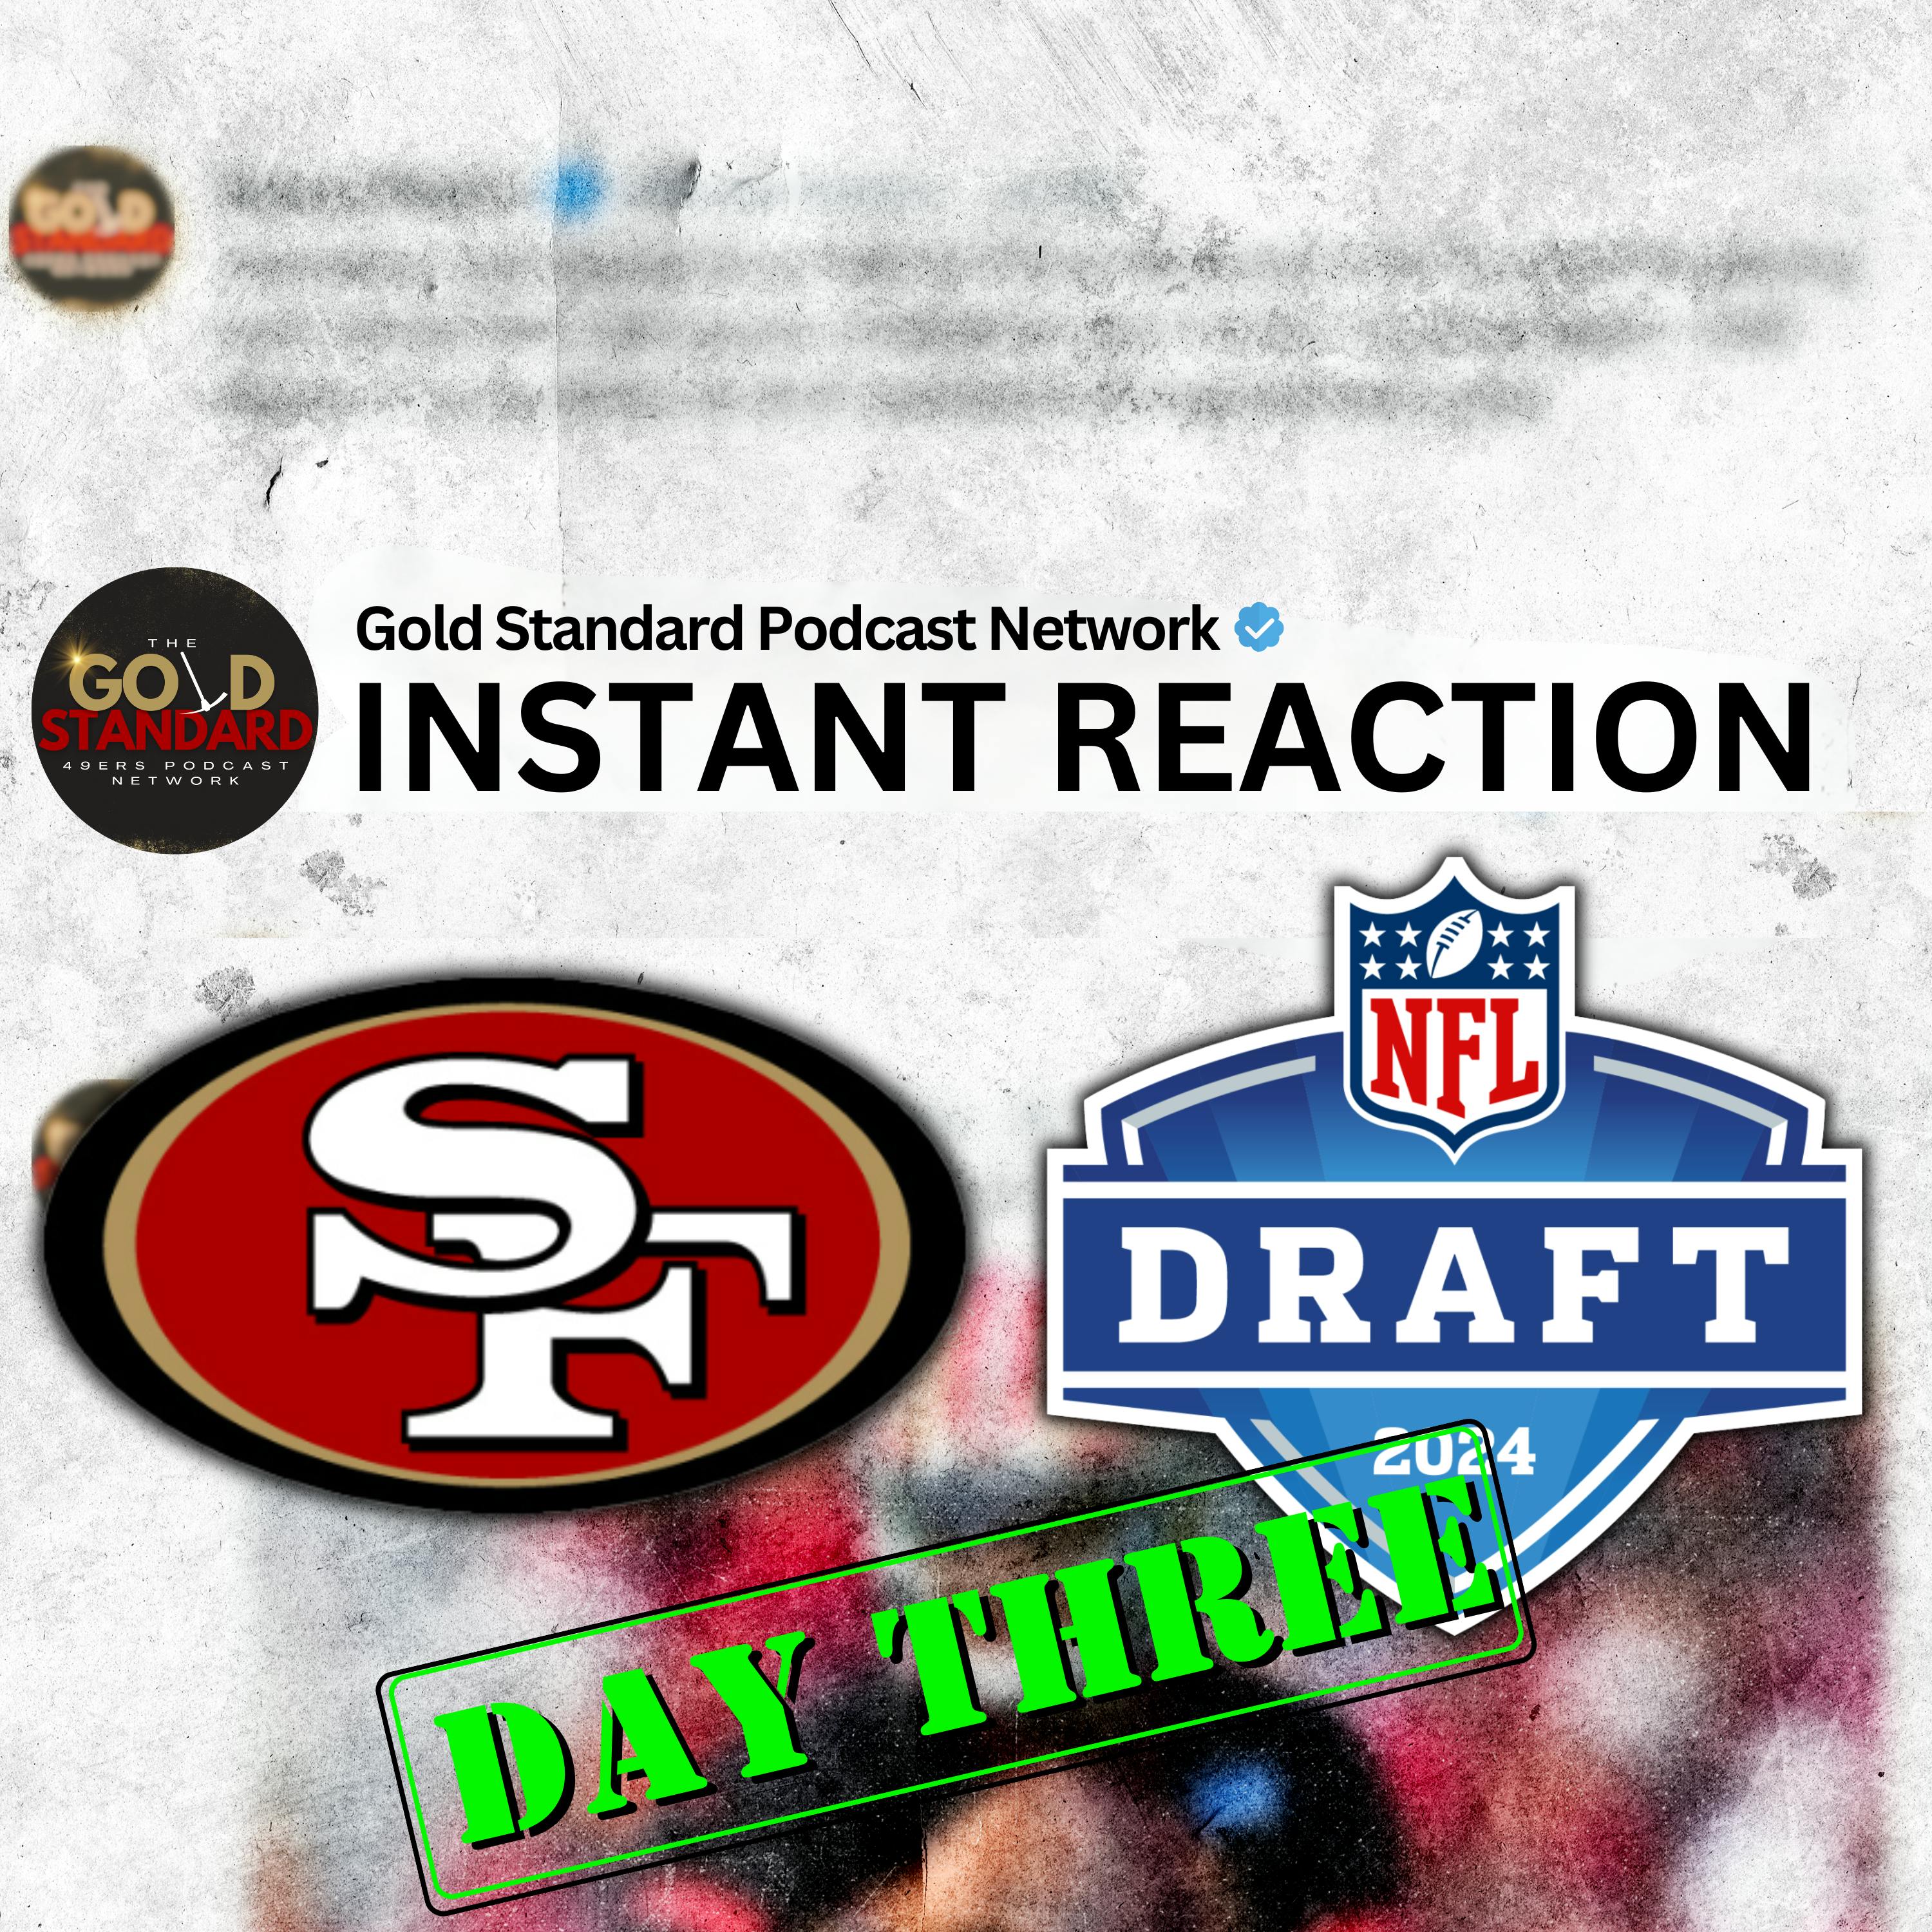 NFL Draft Day 3 Instant Reaction: The 49ers add speed and power